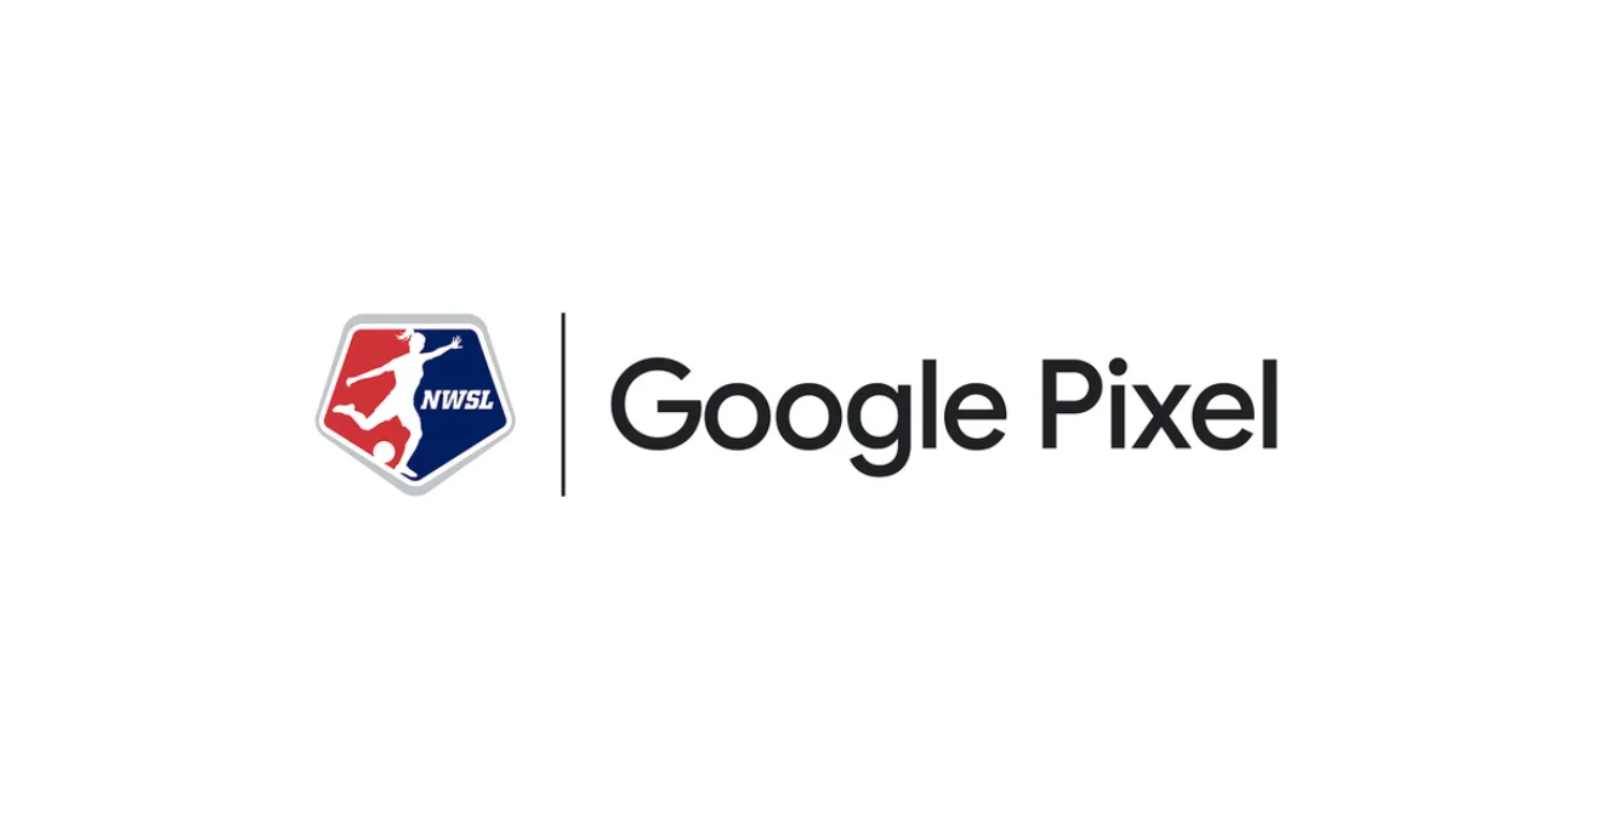 Google Pixel becomes the official phone of the National Women’s Soccer League